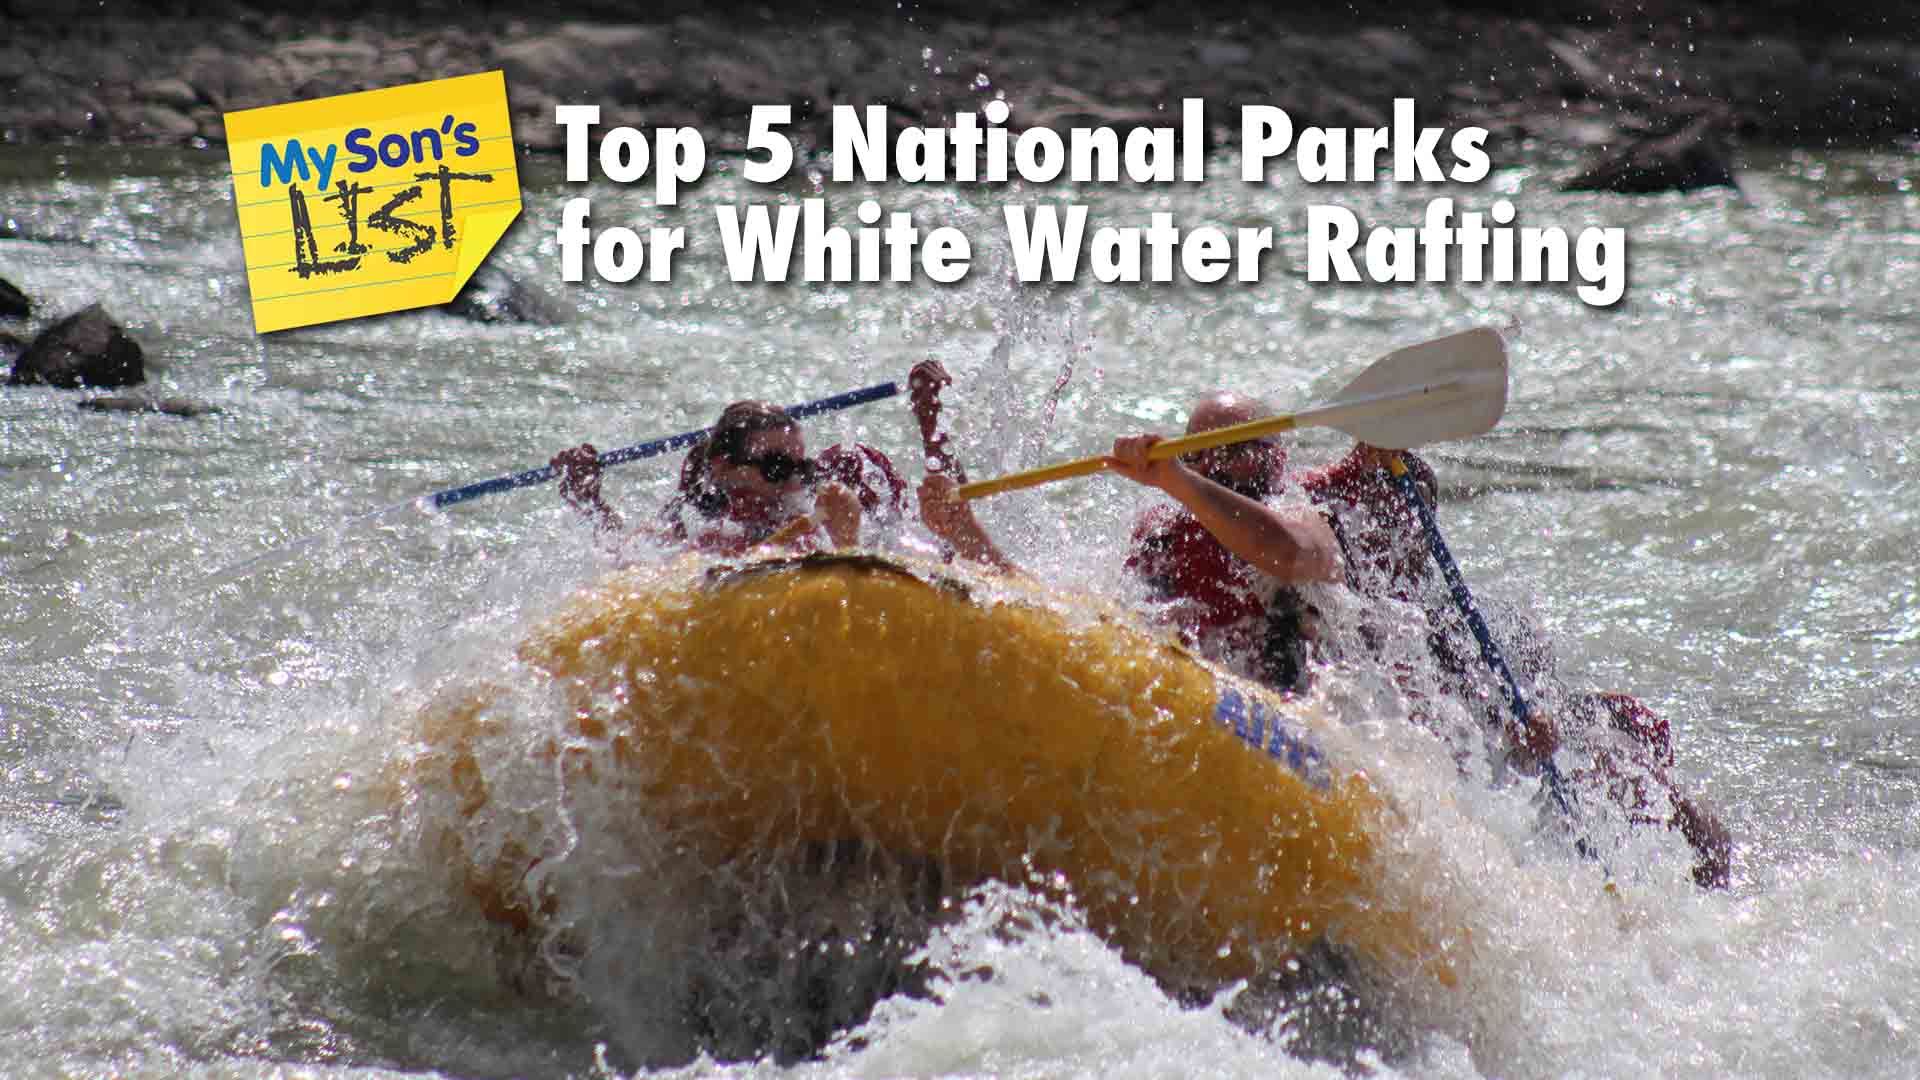 Top 5 National Parks for White Water Rafting